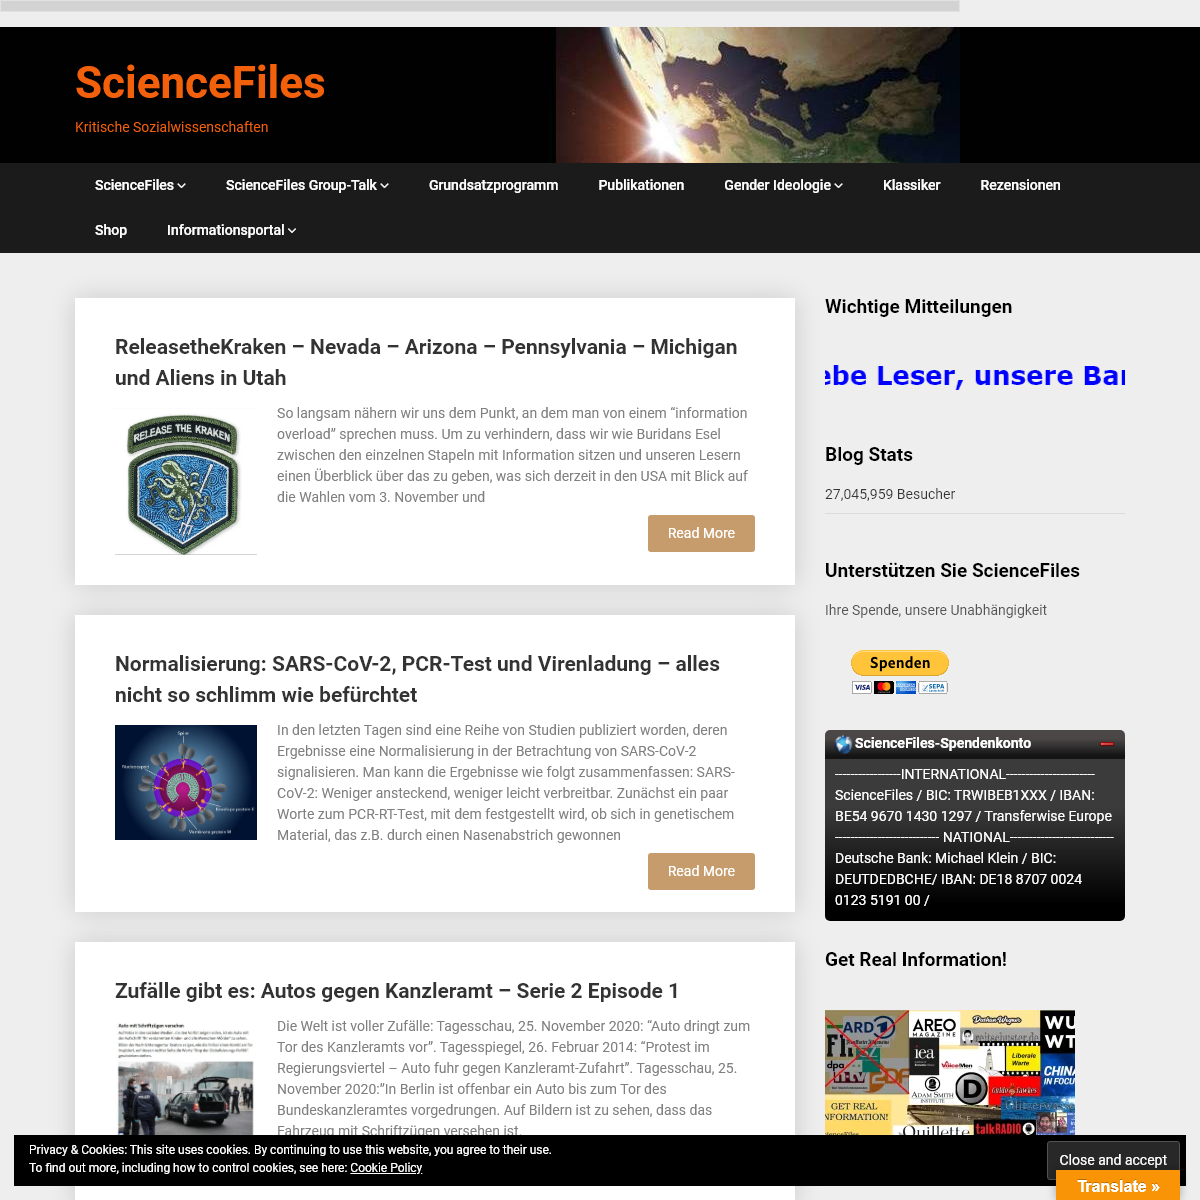 A complete backup of sciencefiles.org